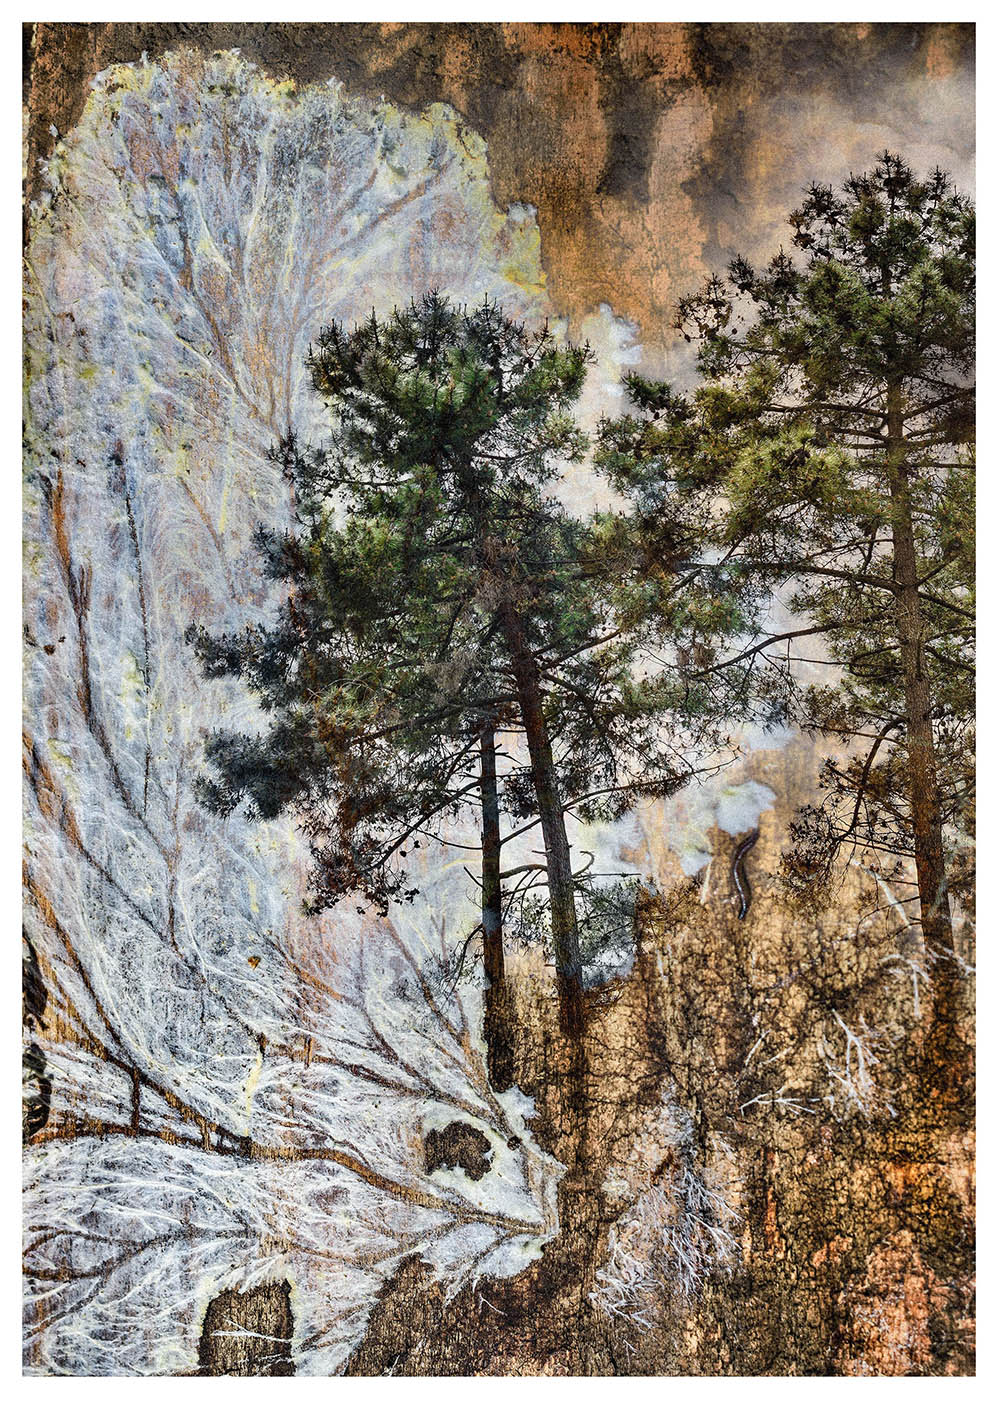 Photographed white wood fungus with overlaid pine trees make this composite photograph form a new mystical forest landscape